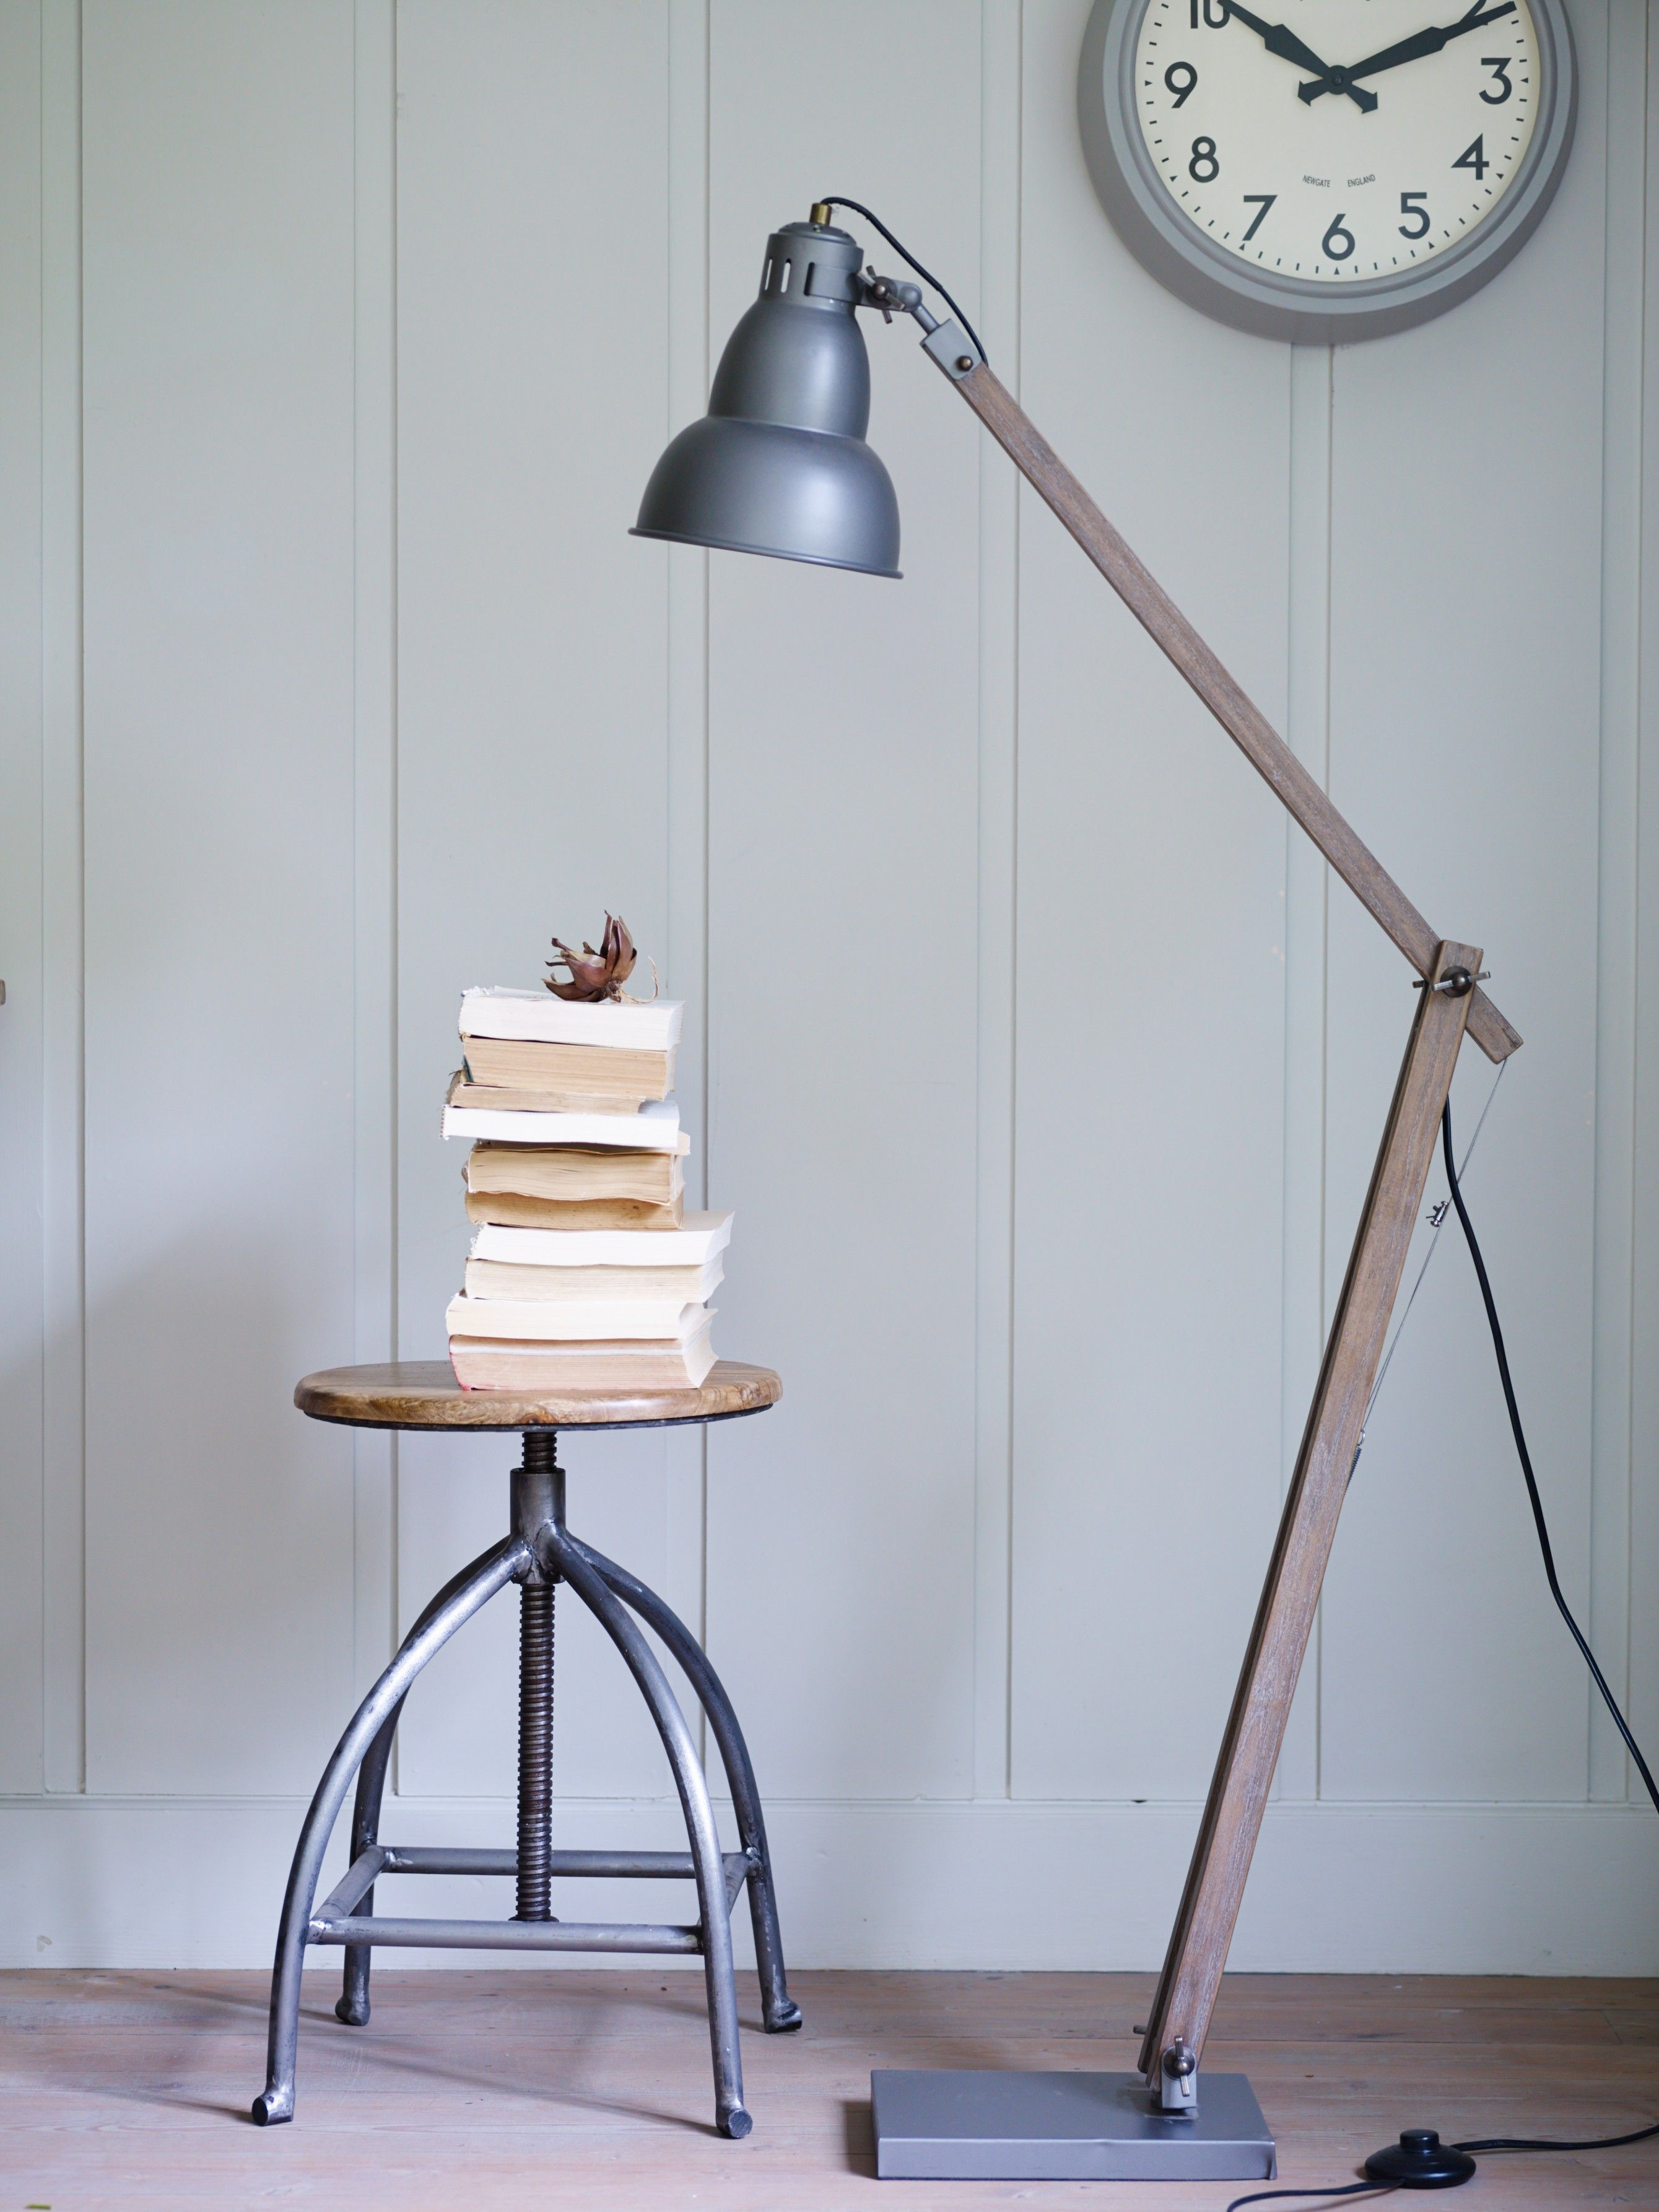 Vintage Style Floor Lamp New Lighting Decorative Home with regard to measurements 2679 X 3572